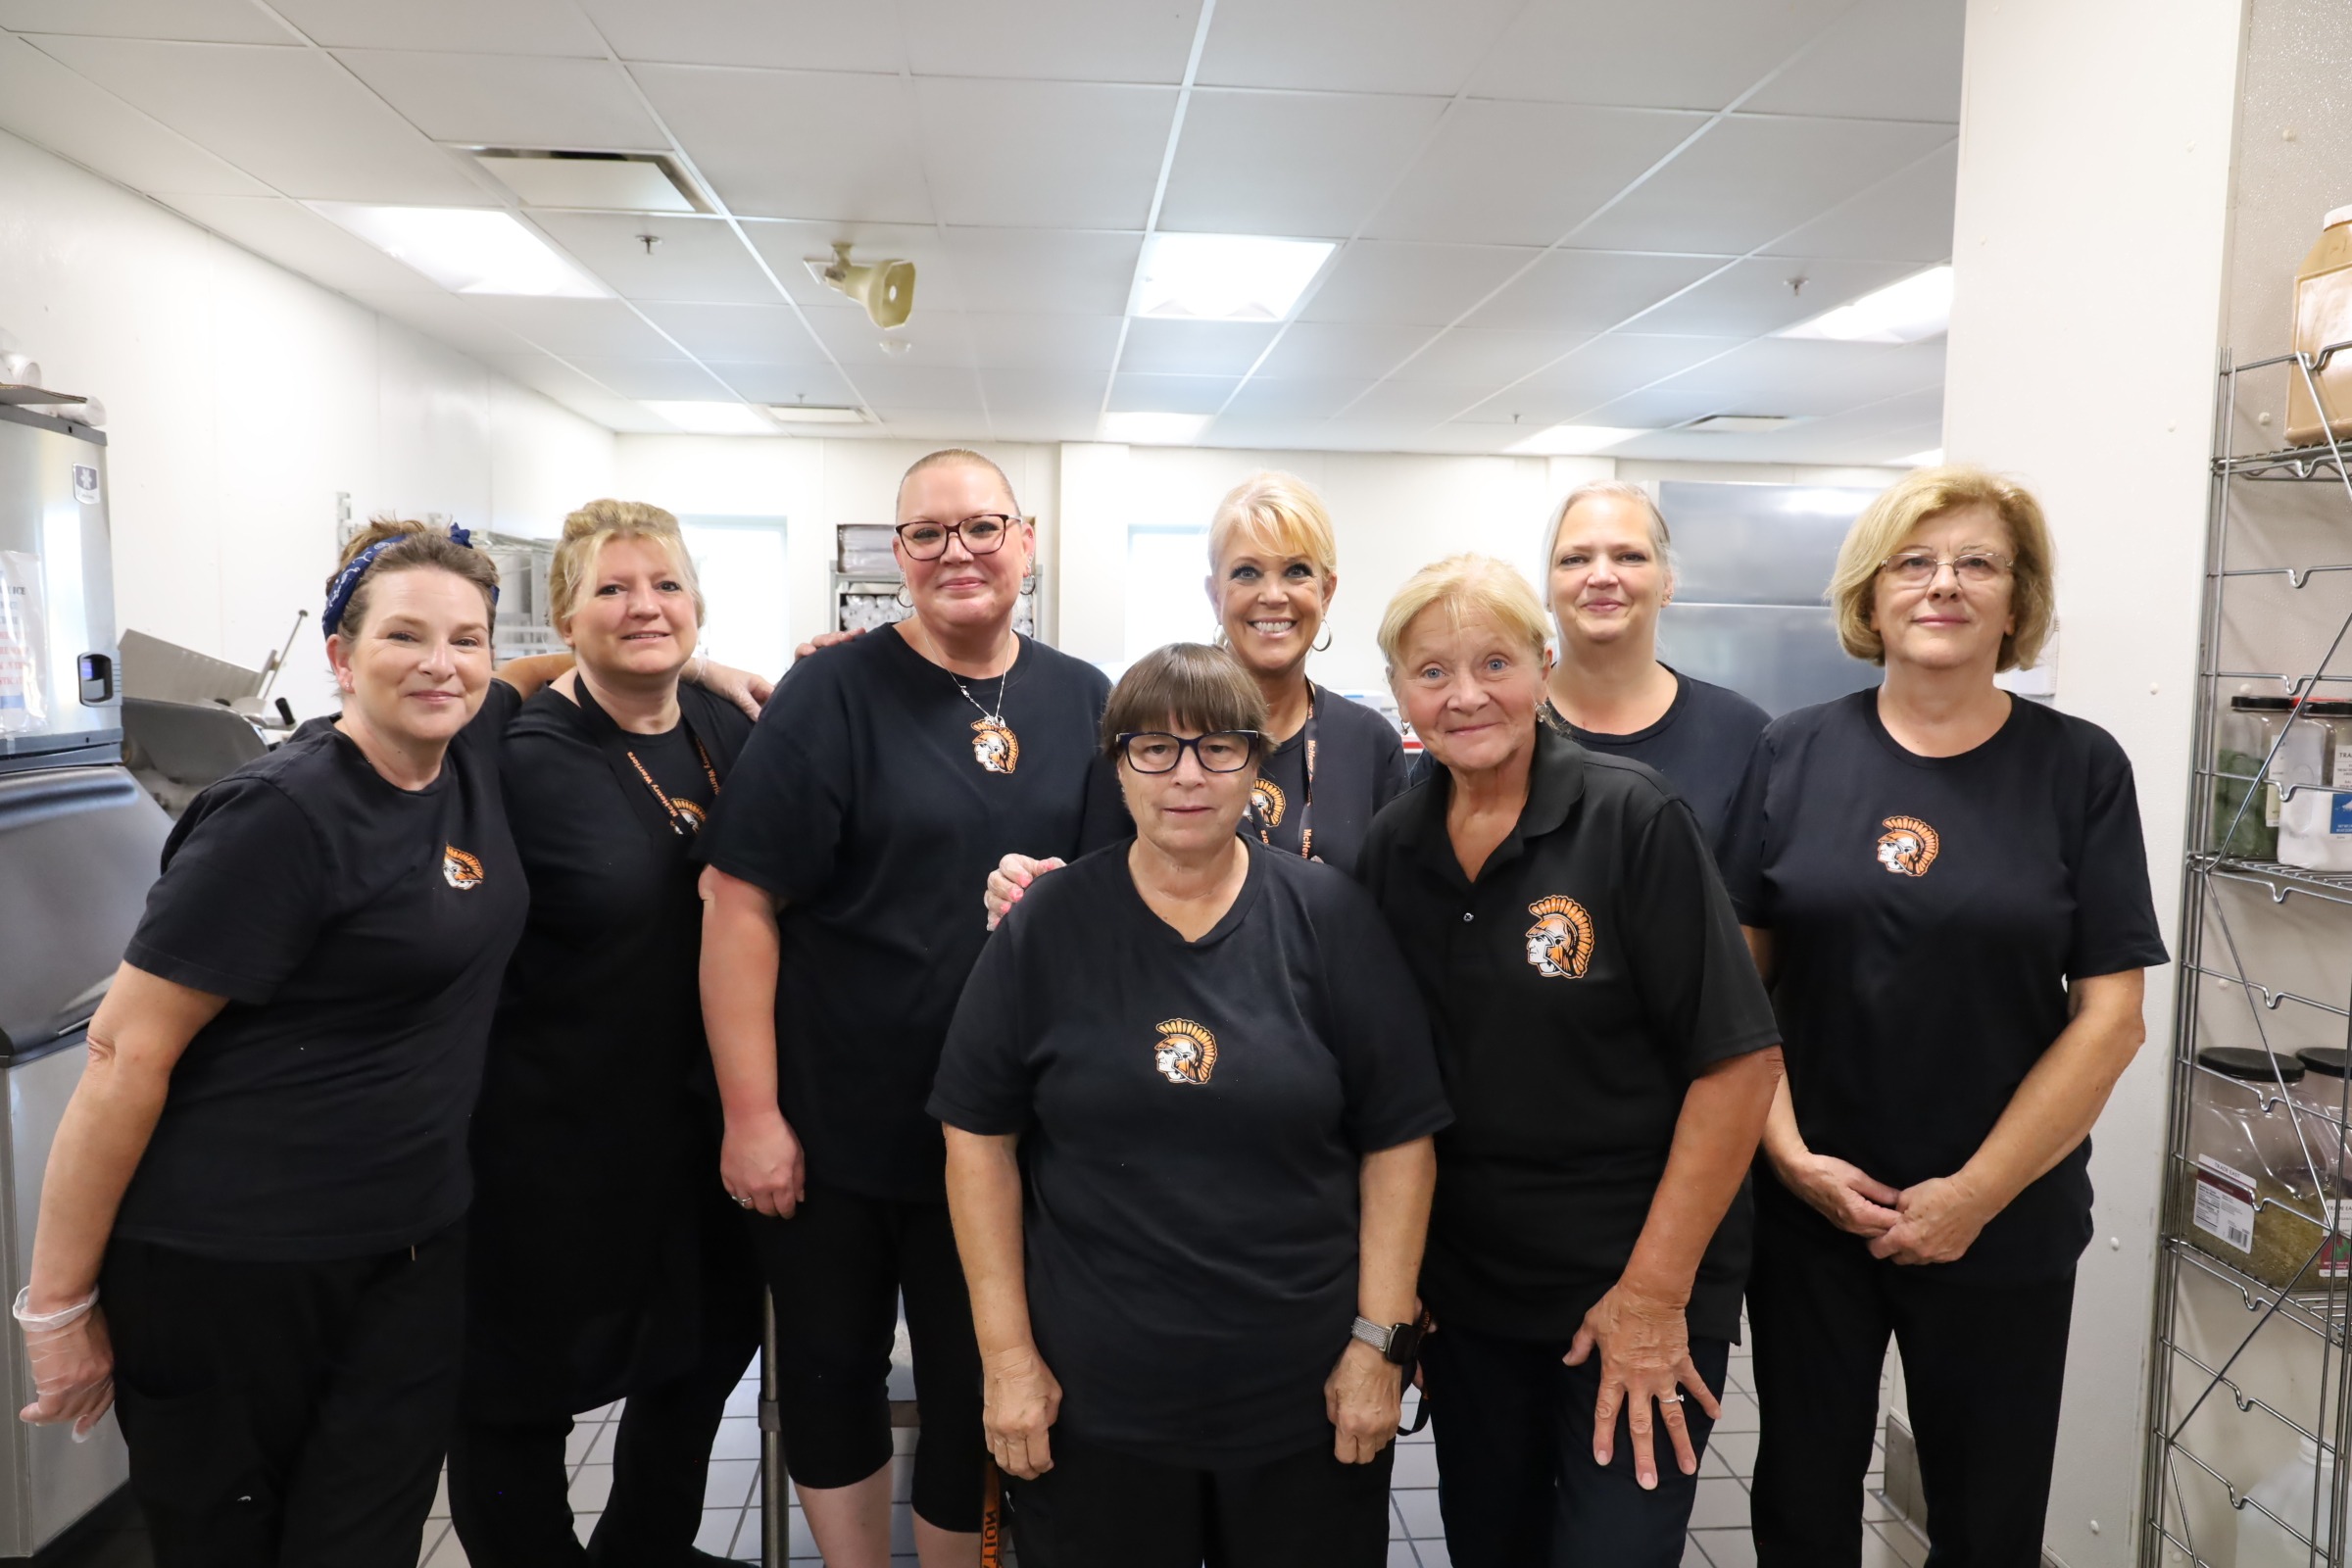 Eight members of food service staff at Upper Campus